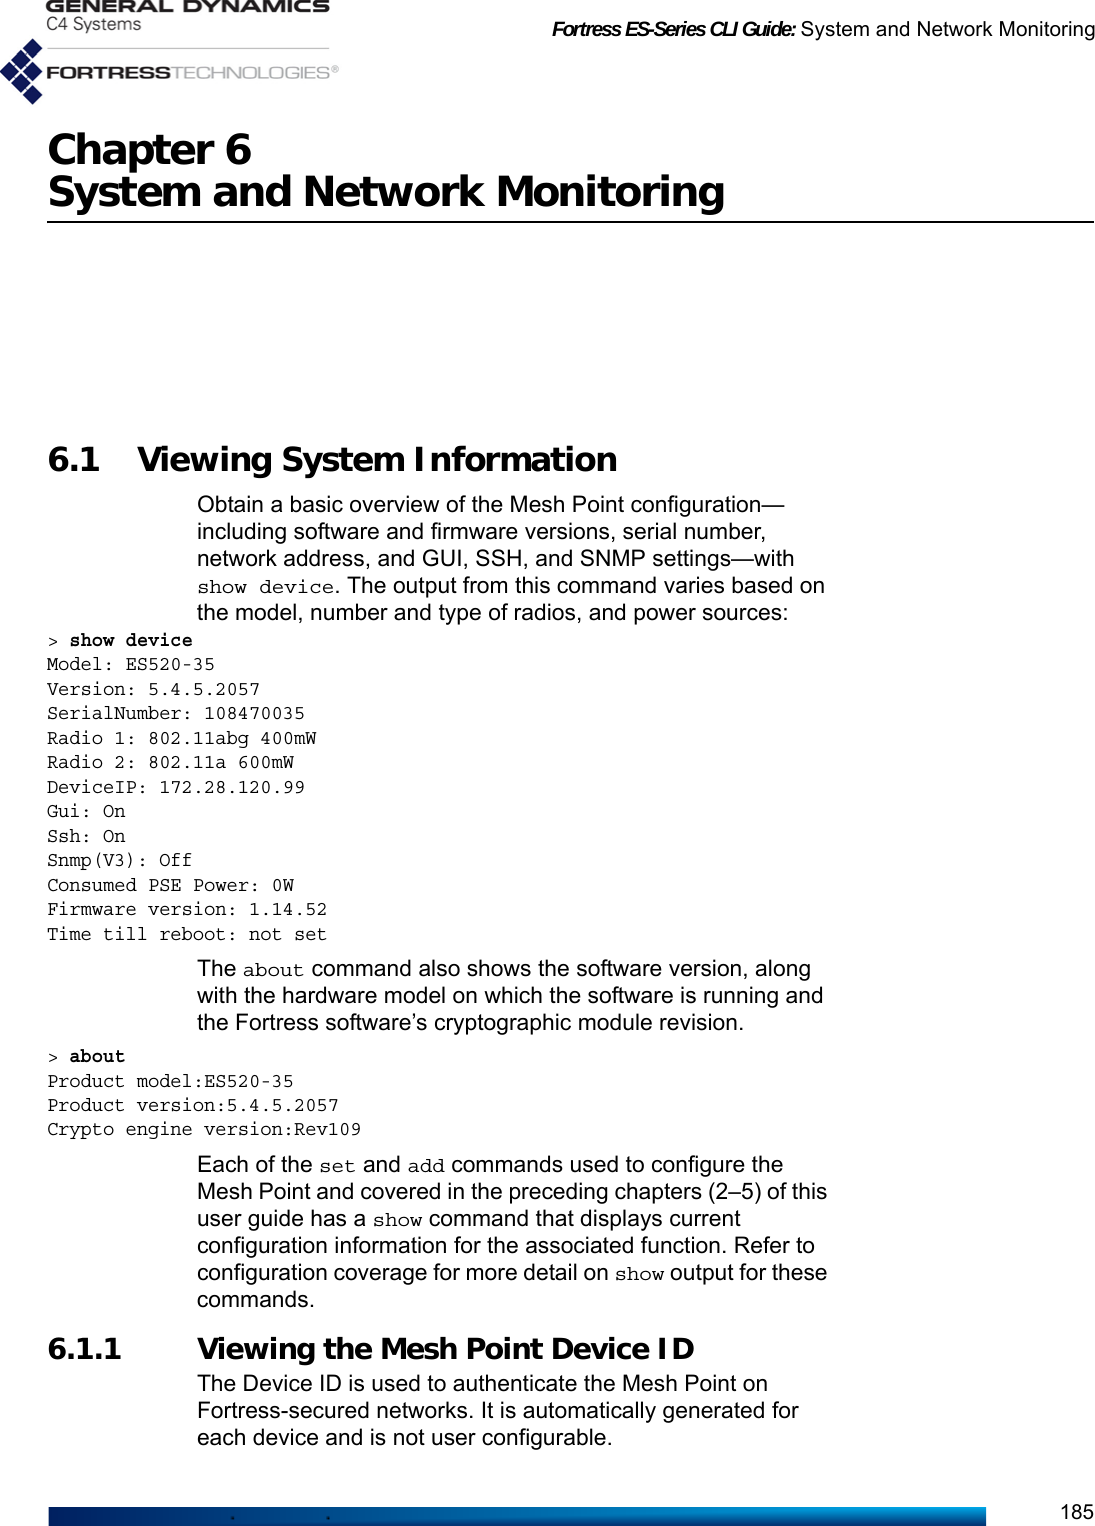 Fortress ES-Series CLI Guide: System and Network Monitoring185Chapter 6System and Network Monitoring6.1 Viewing System Information Obtain a basic overview of the Mesh Point configuration—including software and firmware versions, serial number, network address, and GUI, SSH, and SNMP settings—with show device. The output from this command varies based on the model, number and type of radios, and power sources:&gt; show deviceModel: ES520-35Version: 5.4.5.2057SerialNumber: 108470035Radio 1: 802.11abg 400mWRadio 2: 802.11a 600mWDeviceIP: 172.28.120.99Gui: OnSsh: OnSnmp(V3): OffConsumed PSE Power: 0WFirmware version: 1.14.52Time till reboot: not setThe about command also shows the software version, along with the hardware model on which the software is running and the Fortress software’s cryptographic module revision.&gt; about Product model:ES520-35Product version:5.4.5.2057Crypto engine version:Rev109Each of the set and add commands used to configure the Mesh Point and covered in the preceding chapters (2–5) of this user guide has a show command that displays current configuration information for the associated function. Refer to configuration coverage for more detail on show output for these commands.6.1.1 Viewing the Mesh Point Device ID The Device ID is used to authenticate the Mesh Point on Fortress-secured networks. It is automatically generated for each device and is not user configurable. 